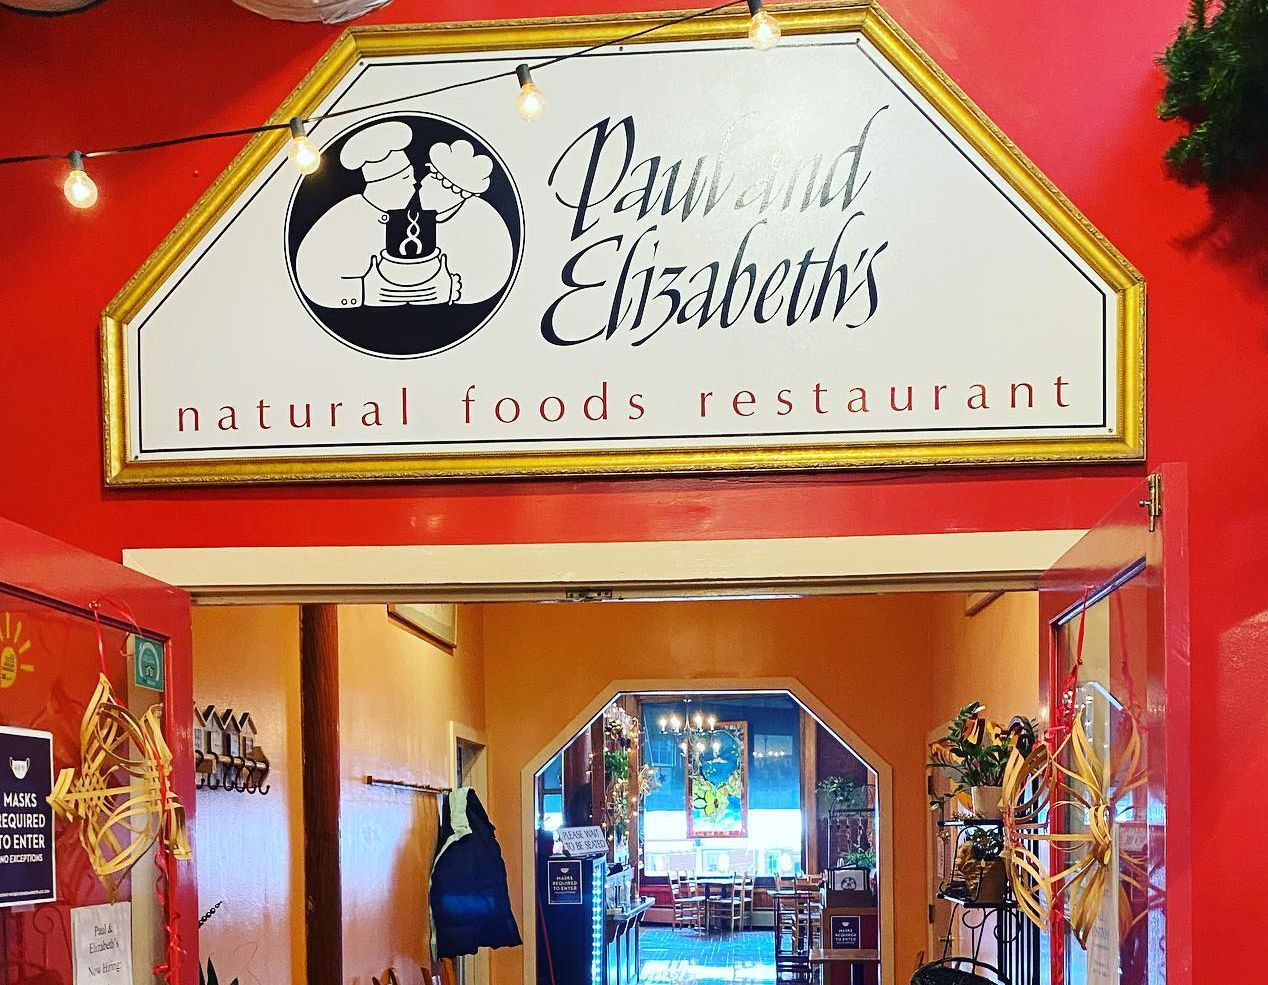 Paul & Elizabeth's is a natural foods restaurant located in Thornes, specializing in vegetarian dishes, the freshest seafood, and freshly baked rolls.